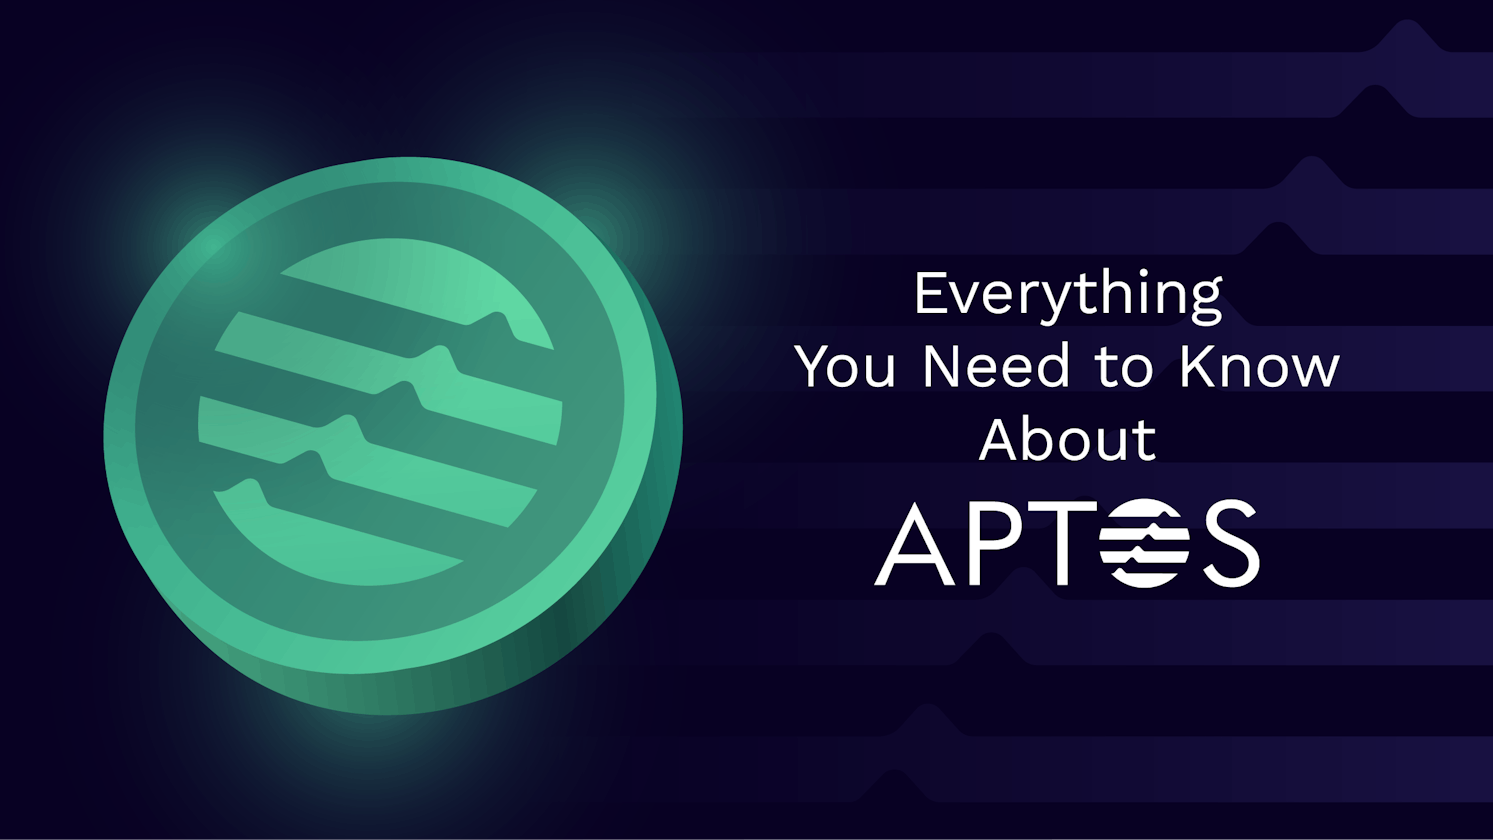 Aptos: Igniting the Blockchain Revolution with Unlimited Potential